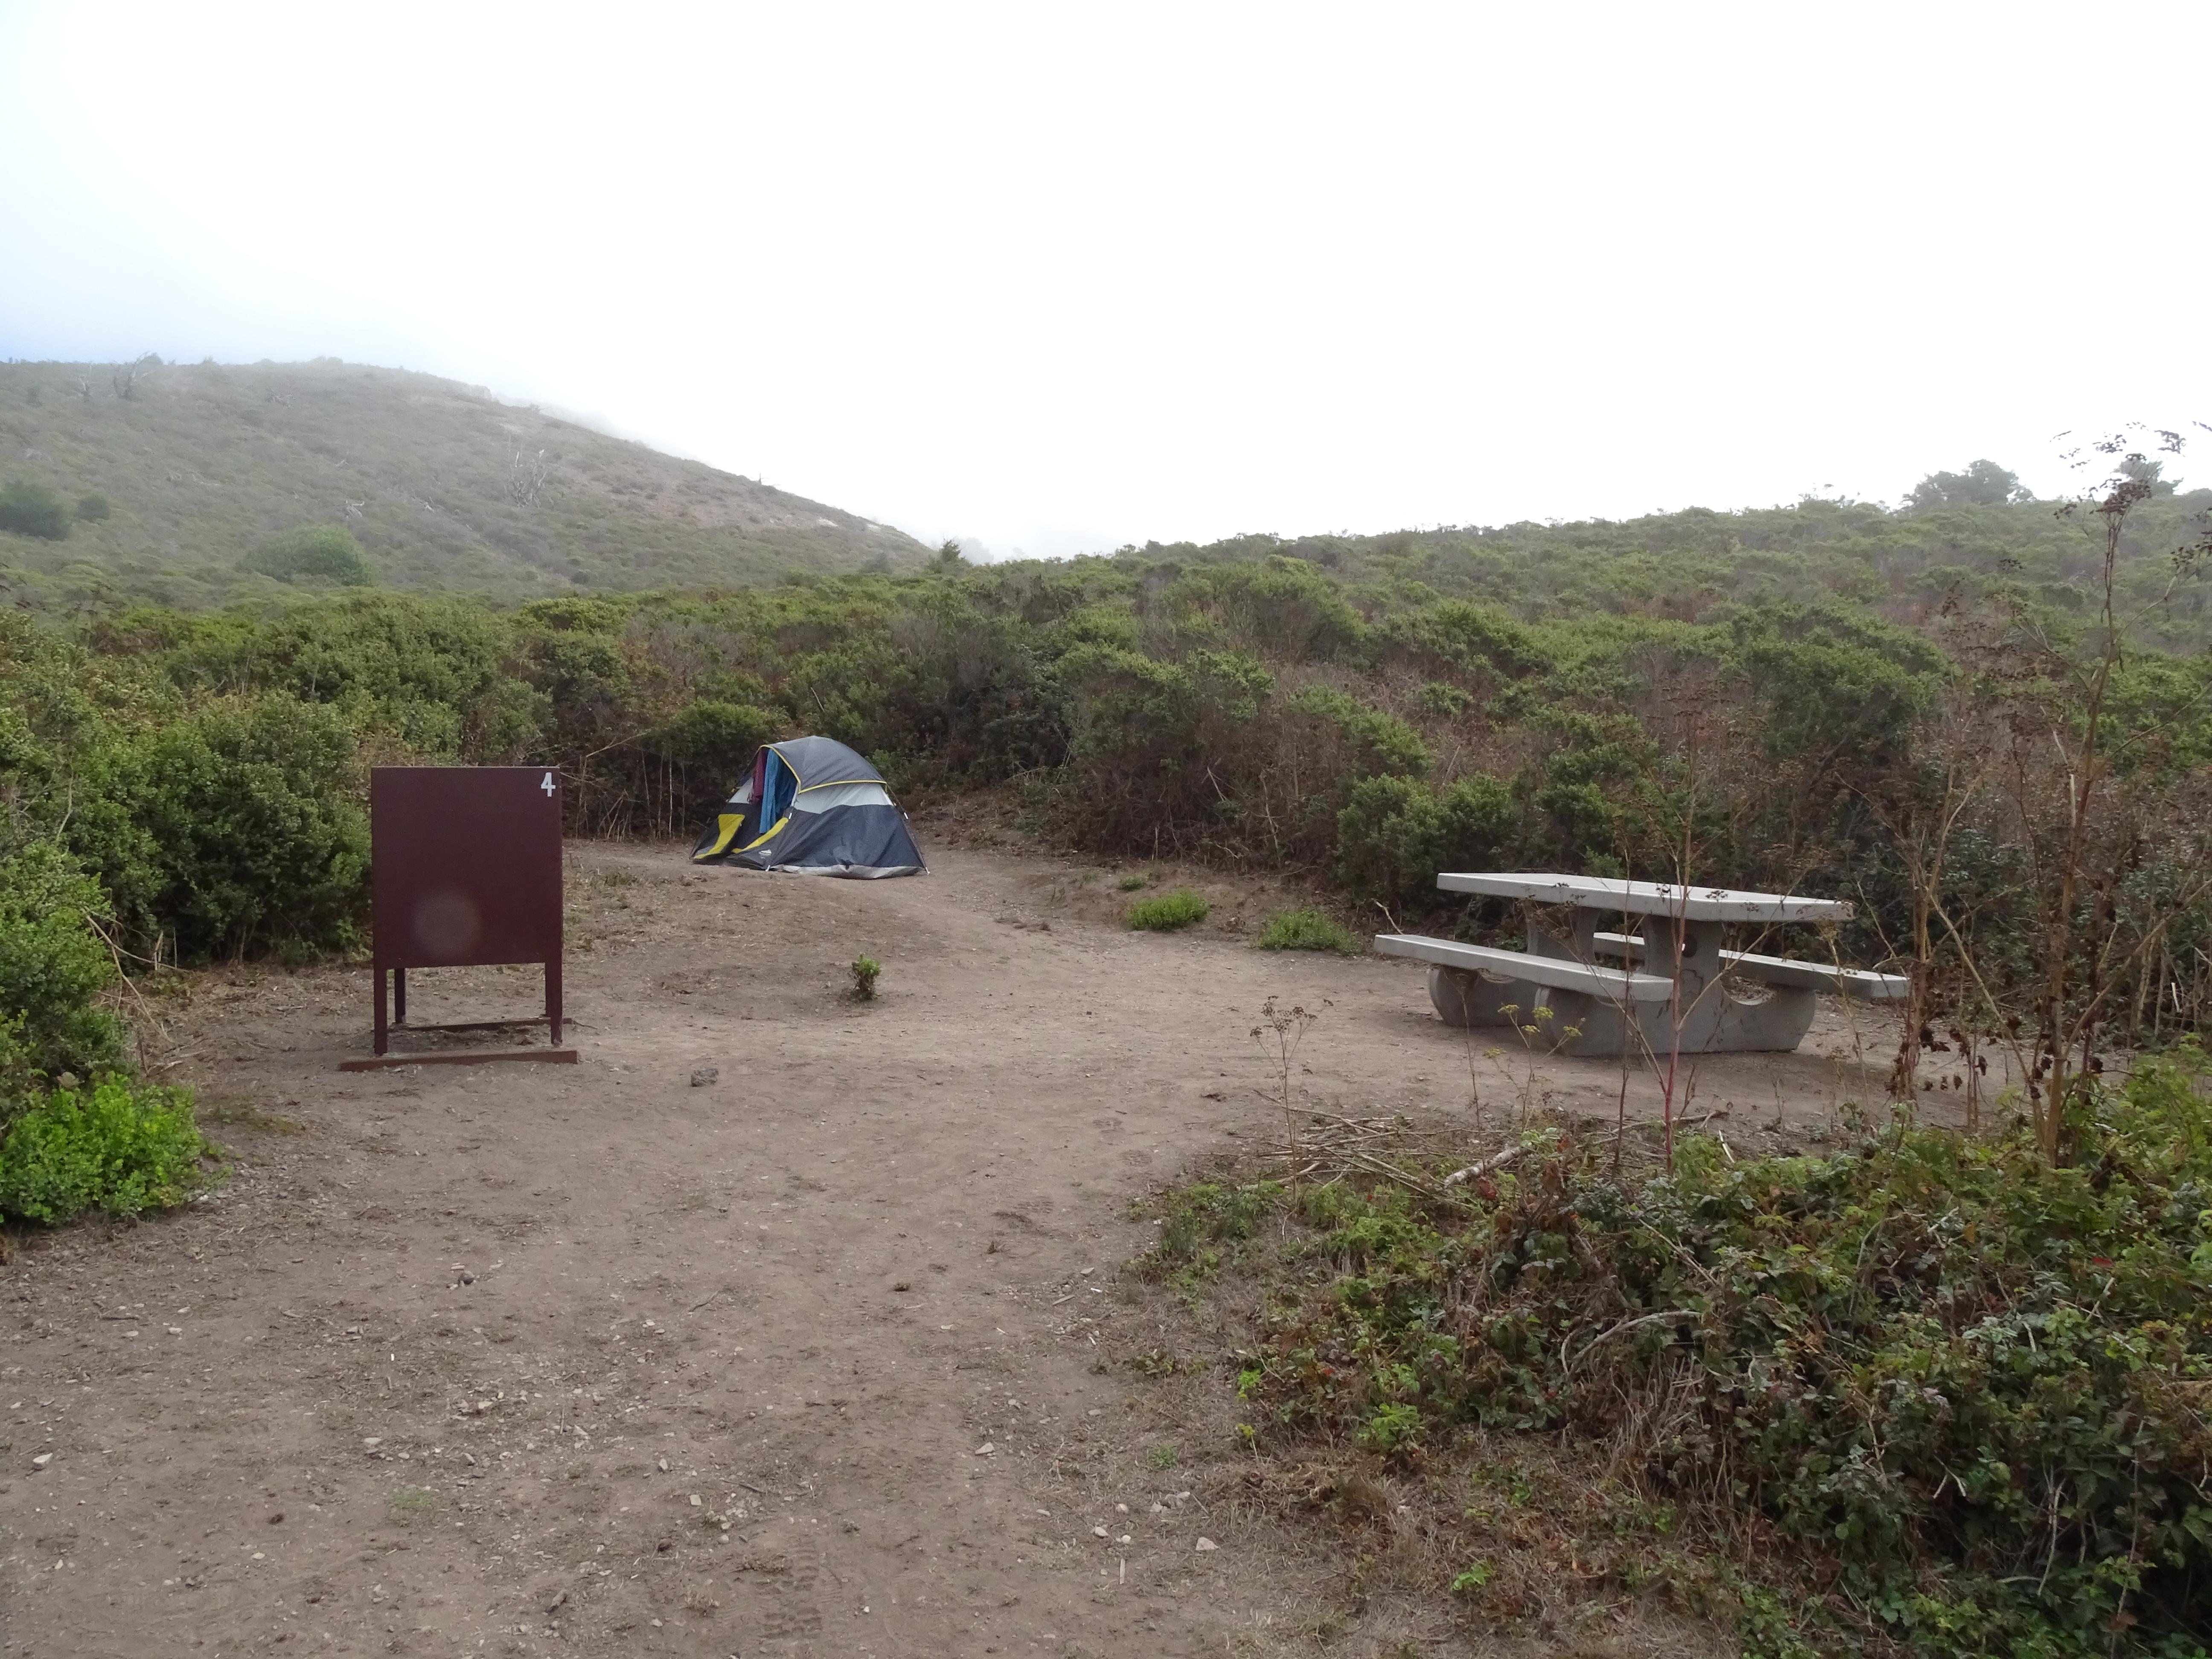 A campsite containing a tent, a picnic table, and a food storage locker surrounded by shrubs.